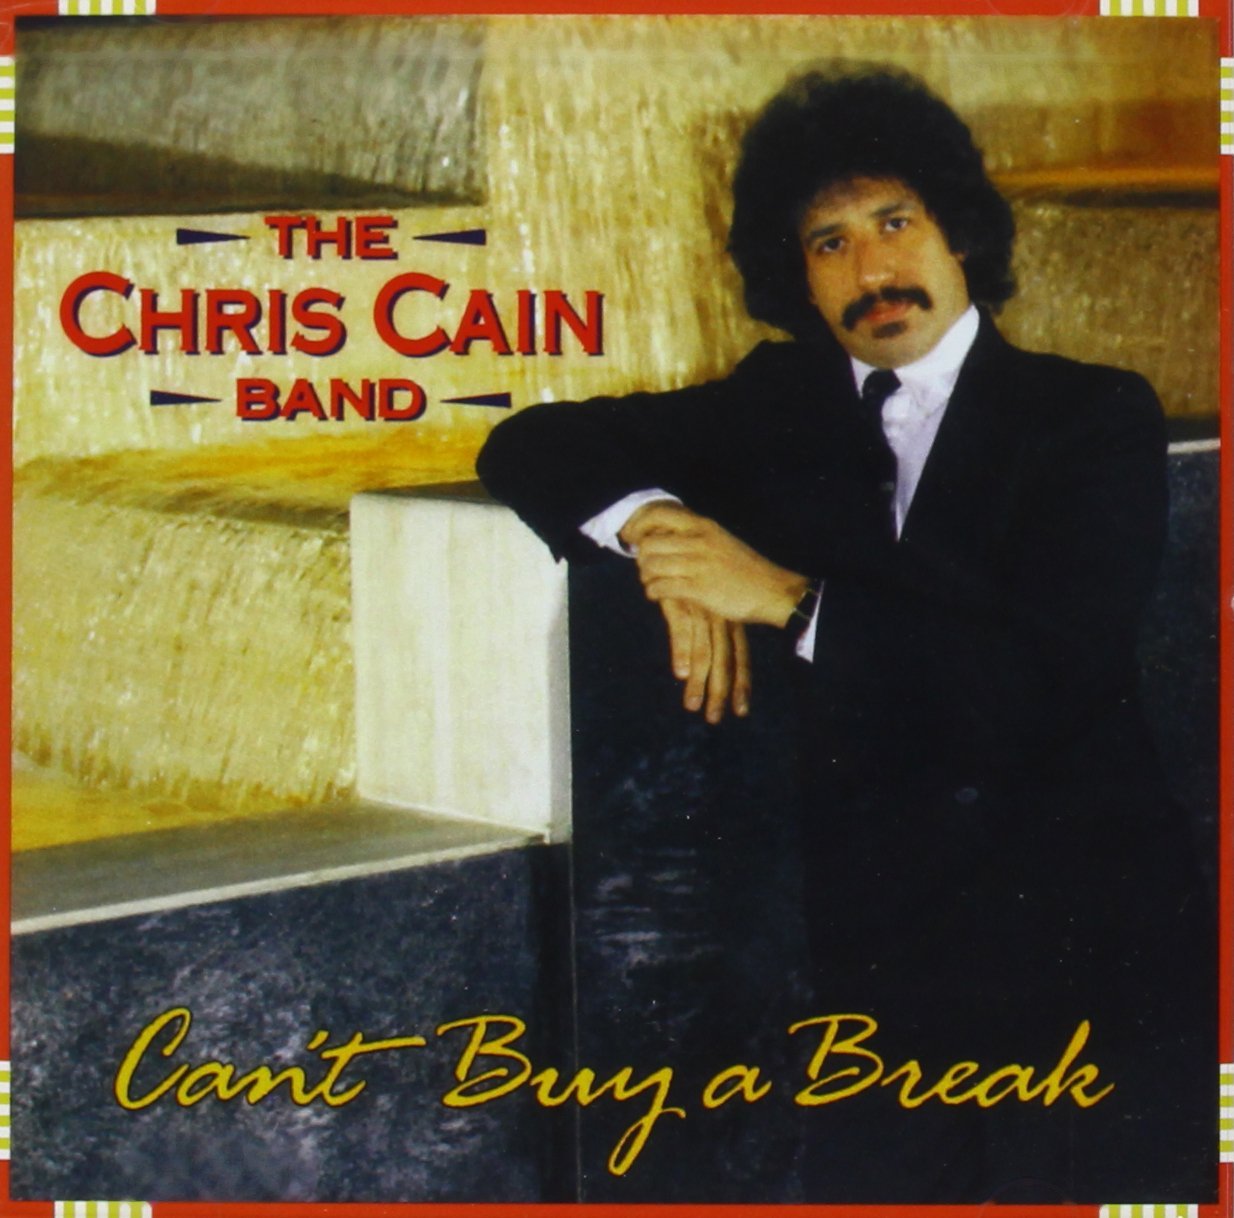 Can't Buy A Break CD cover, Chris Cain